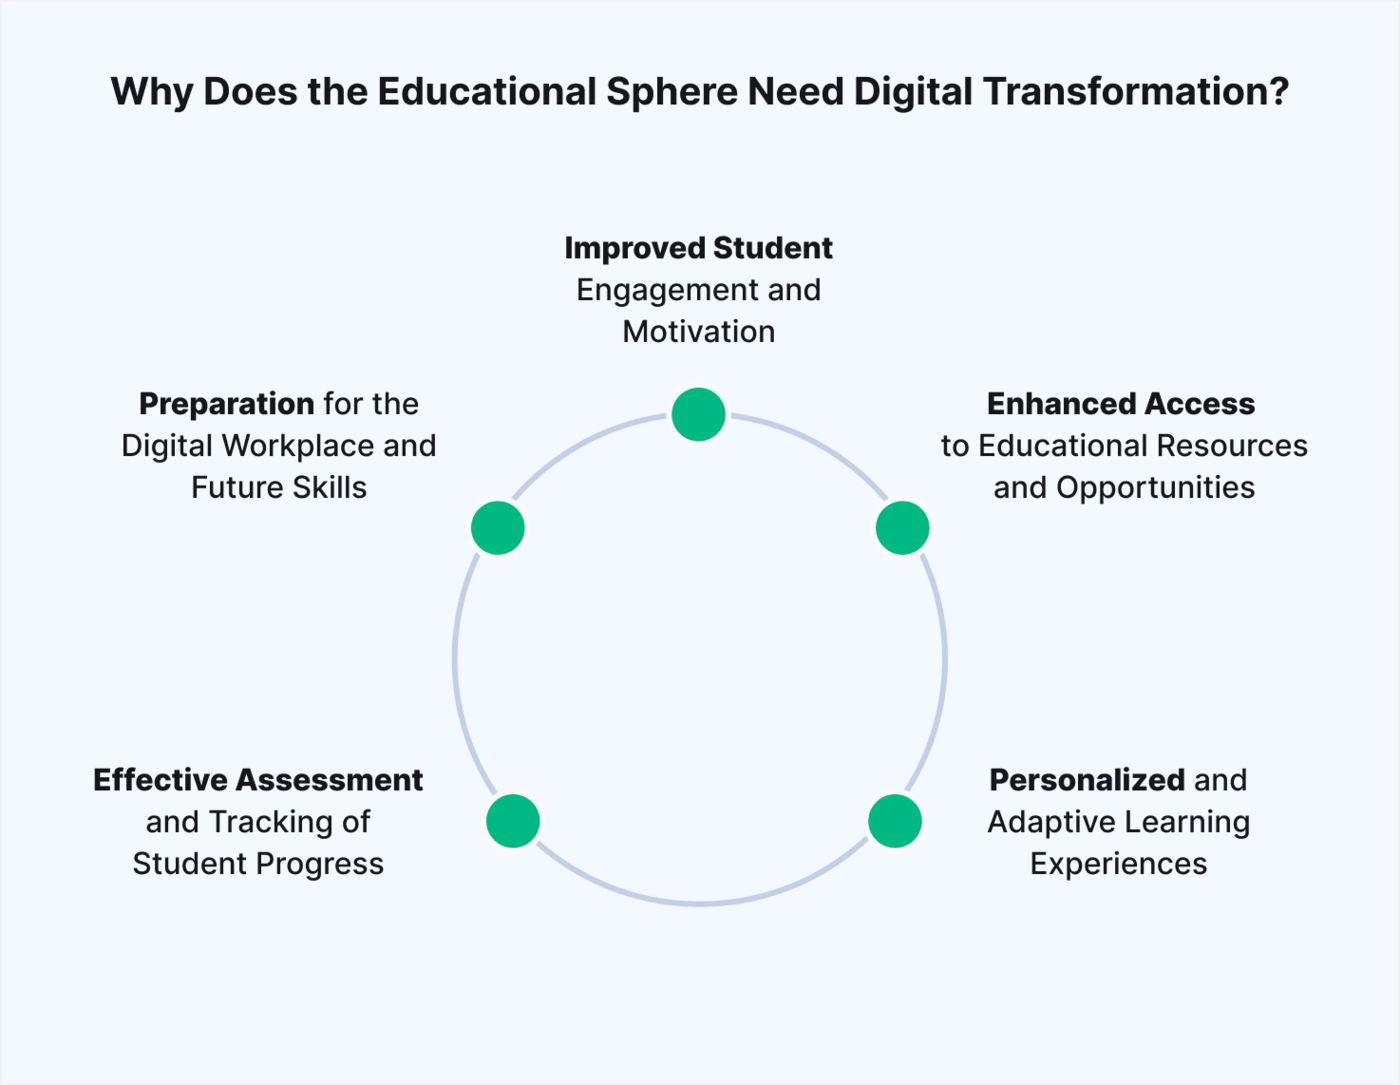 The benefits of digital transformation in education